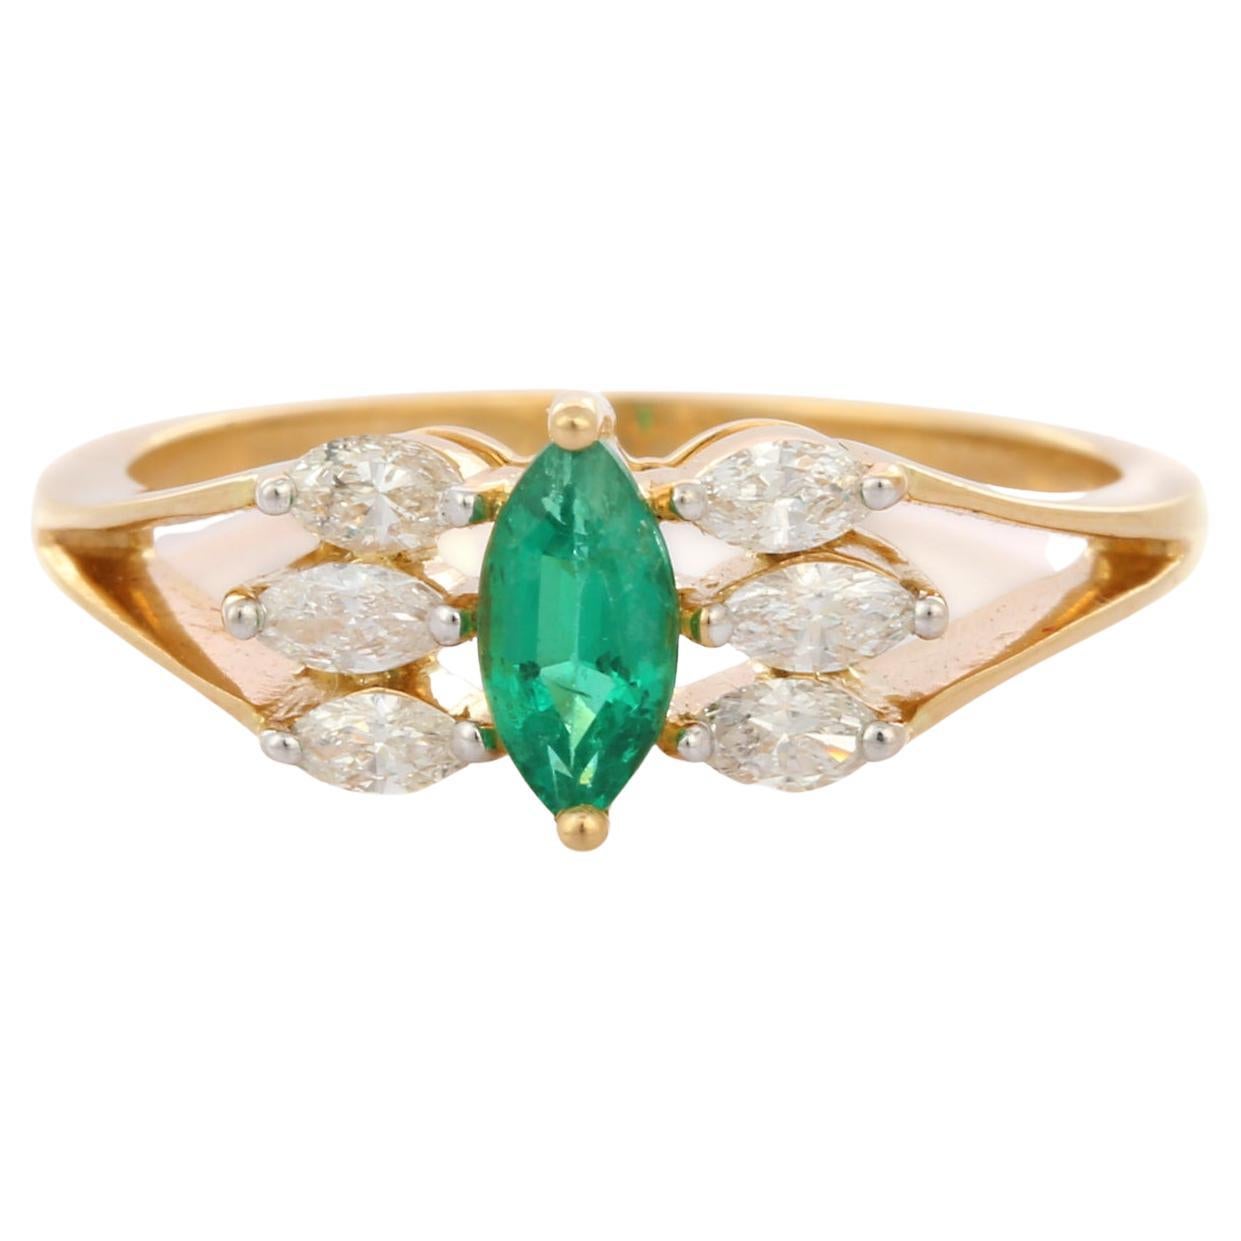 Startling Emerald and Diamond Designer Engagement Ring in 18K Solid Yellow Gold